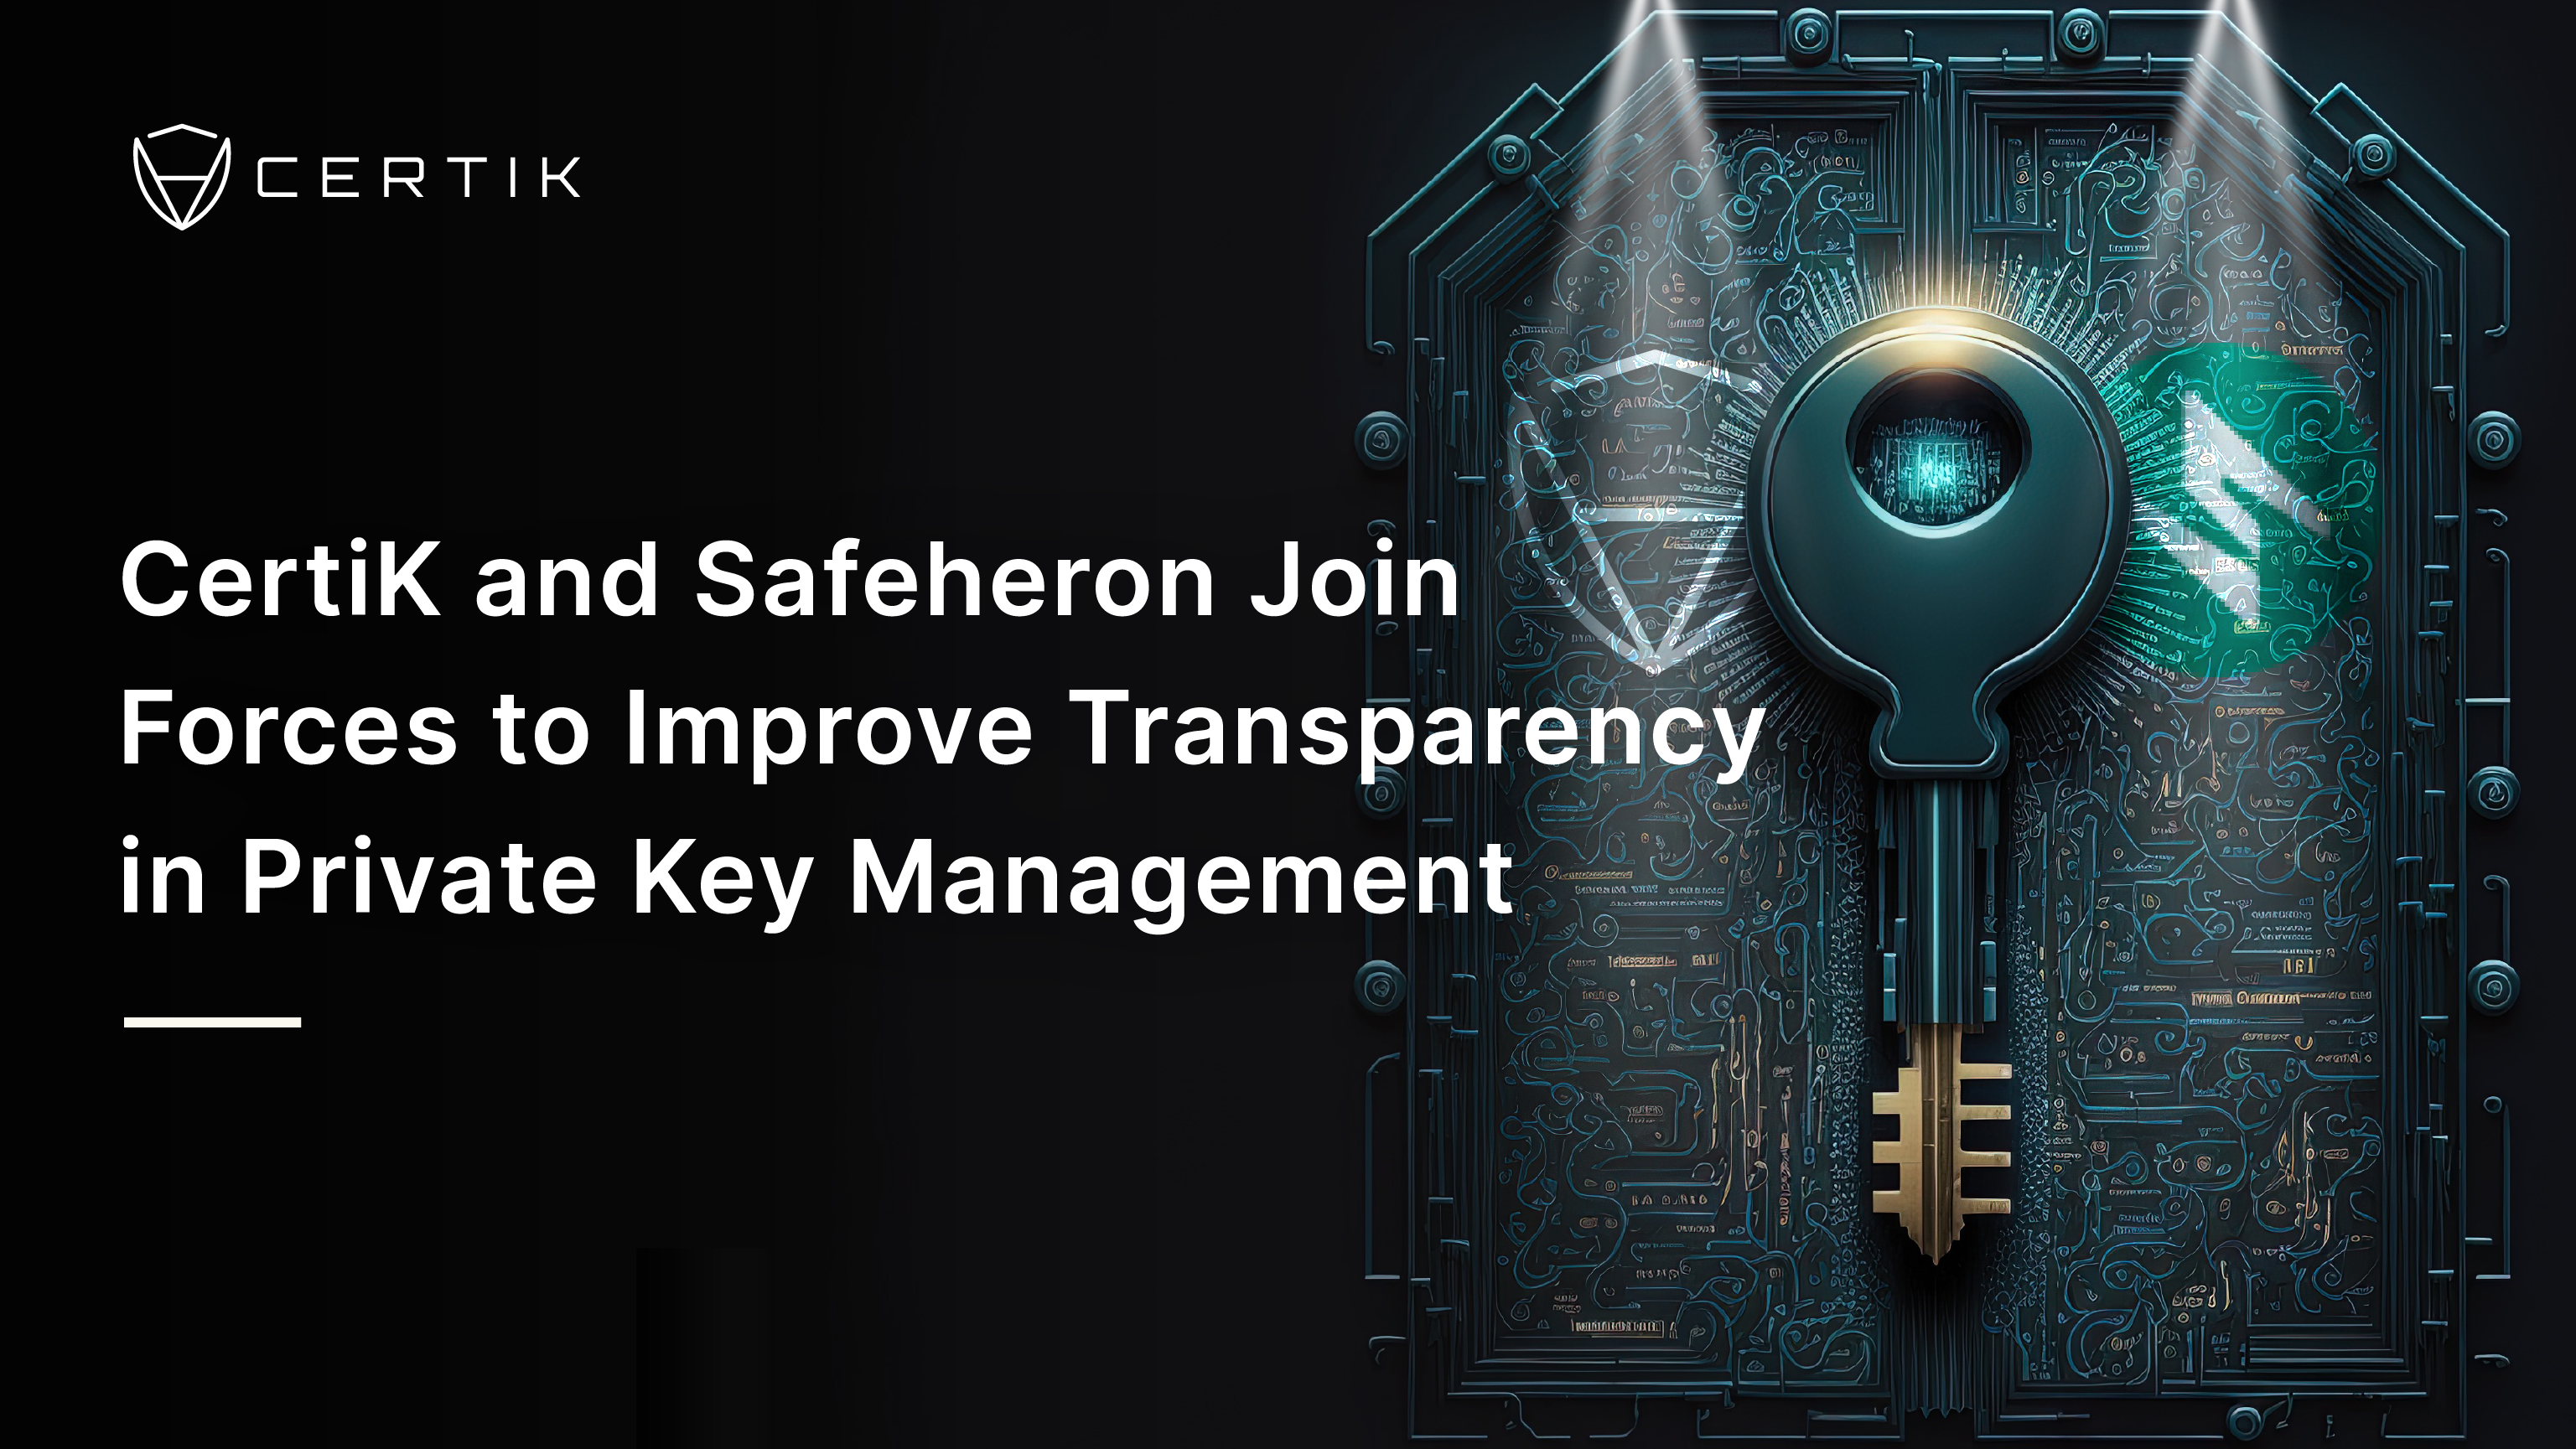 CertiK and Safeheron Join Forces to Improve Transparency in Private Key Management